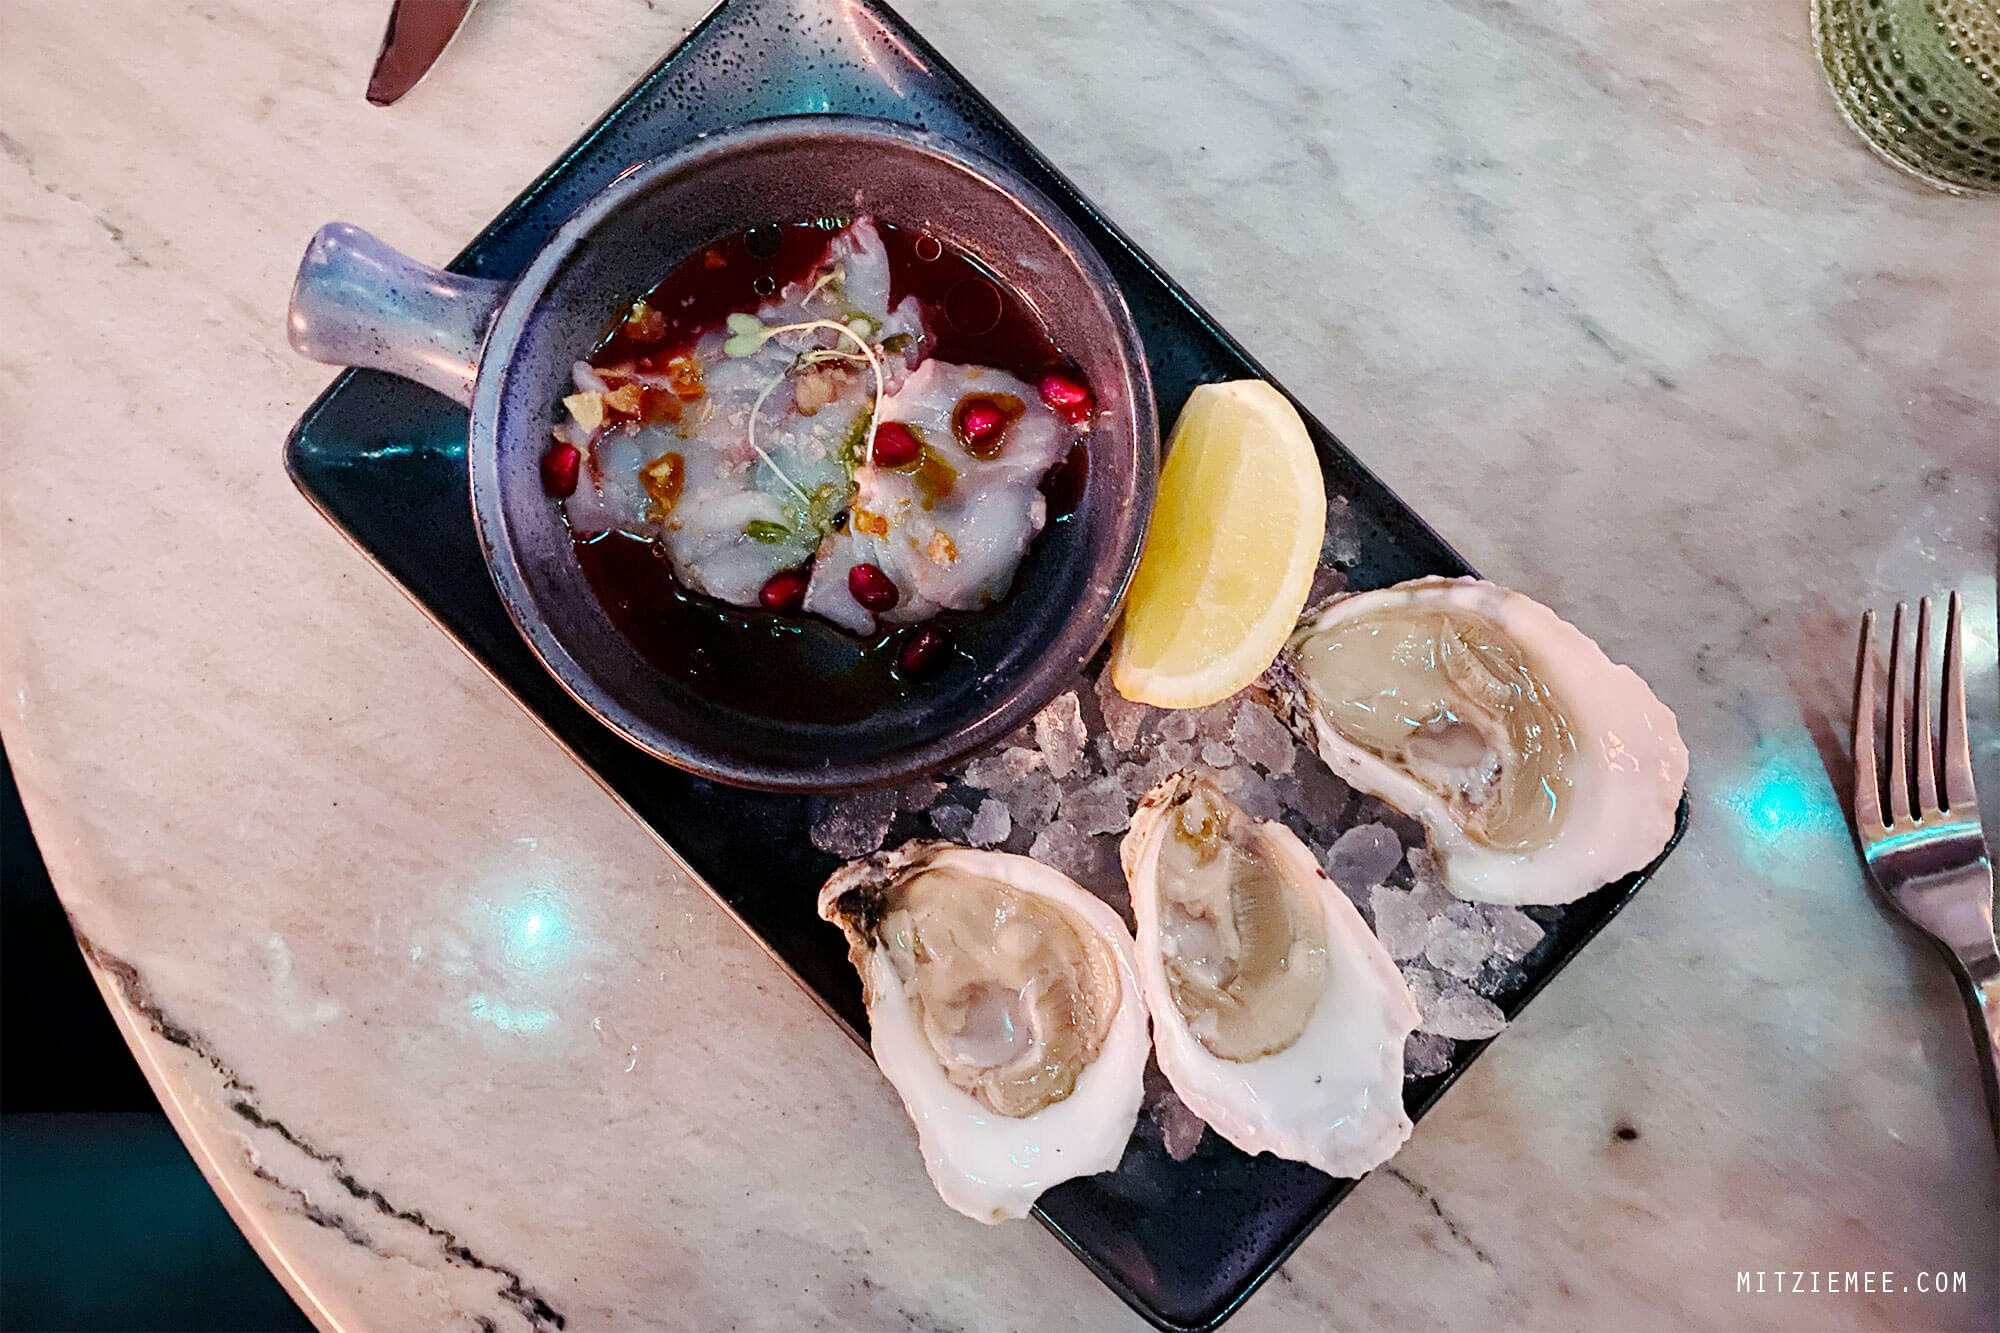 oysters and house crudo at Lamia's Fish Market, East Village, New York